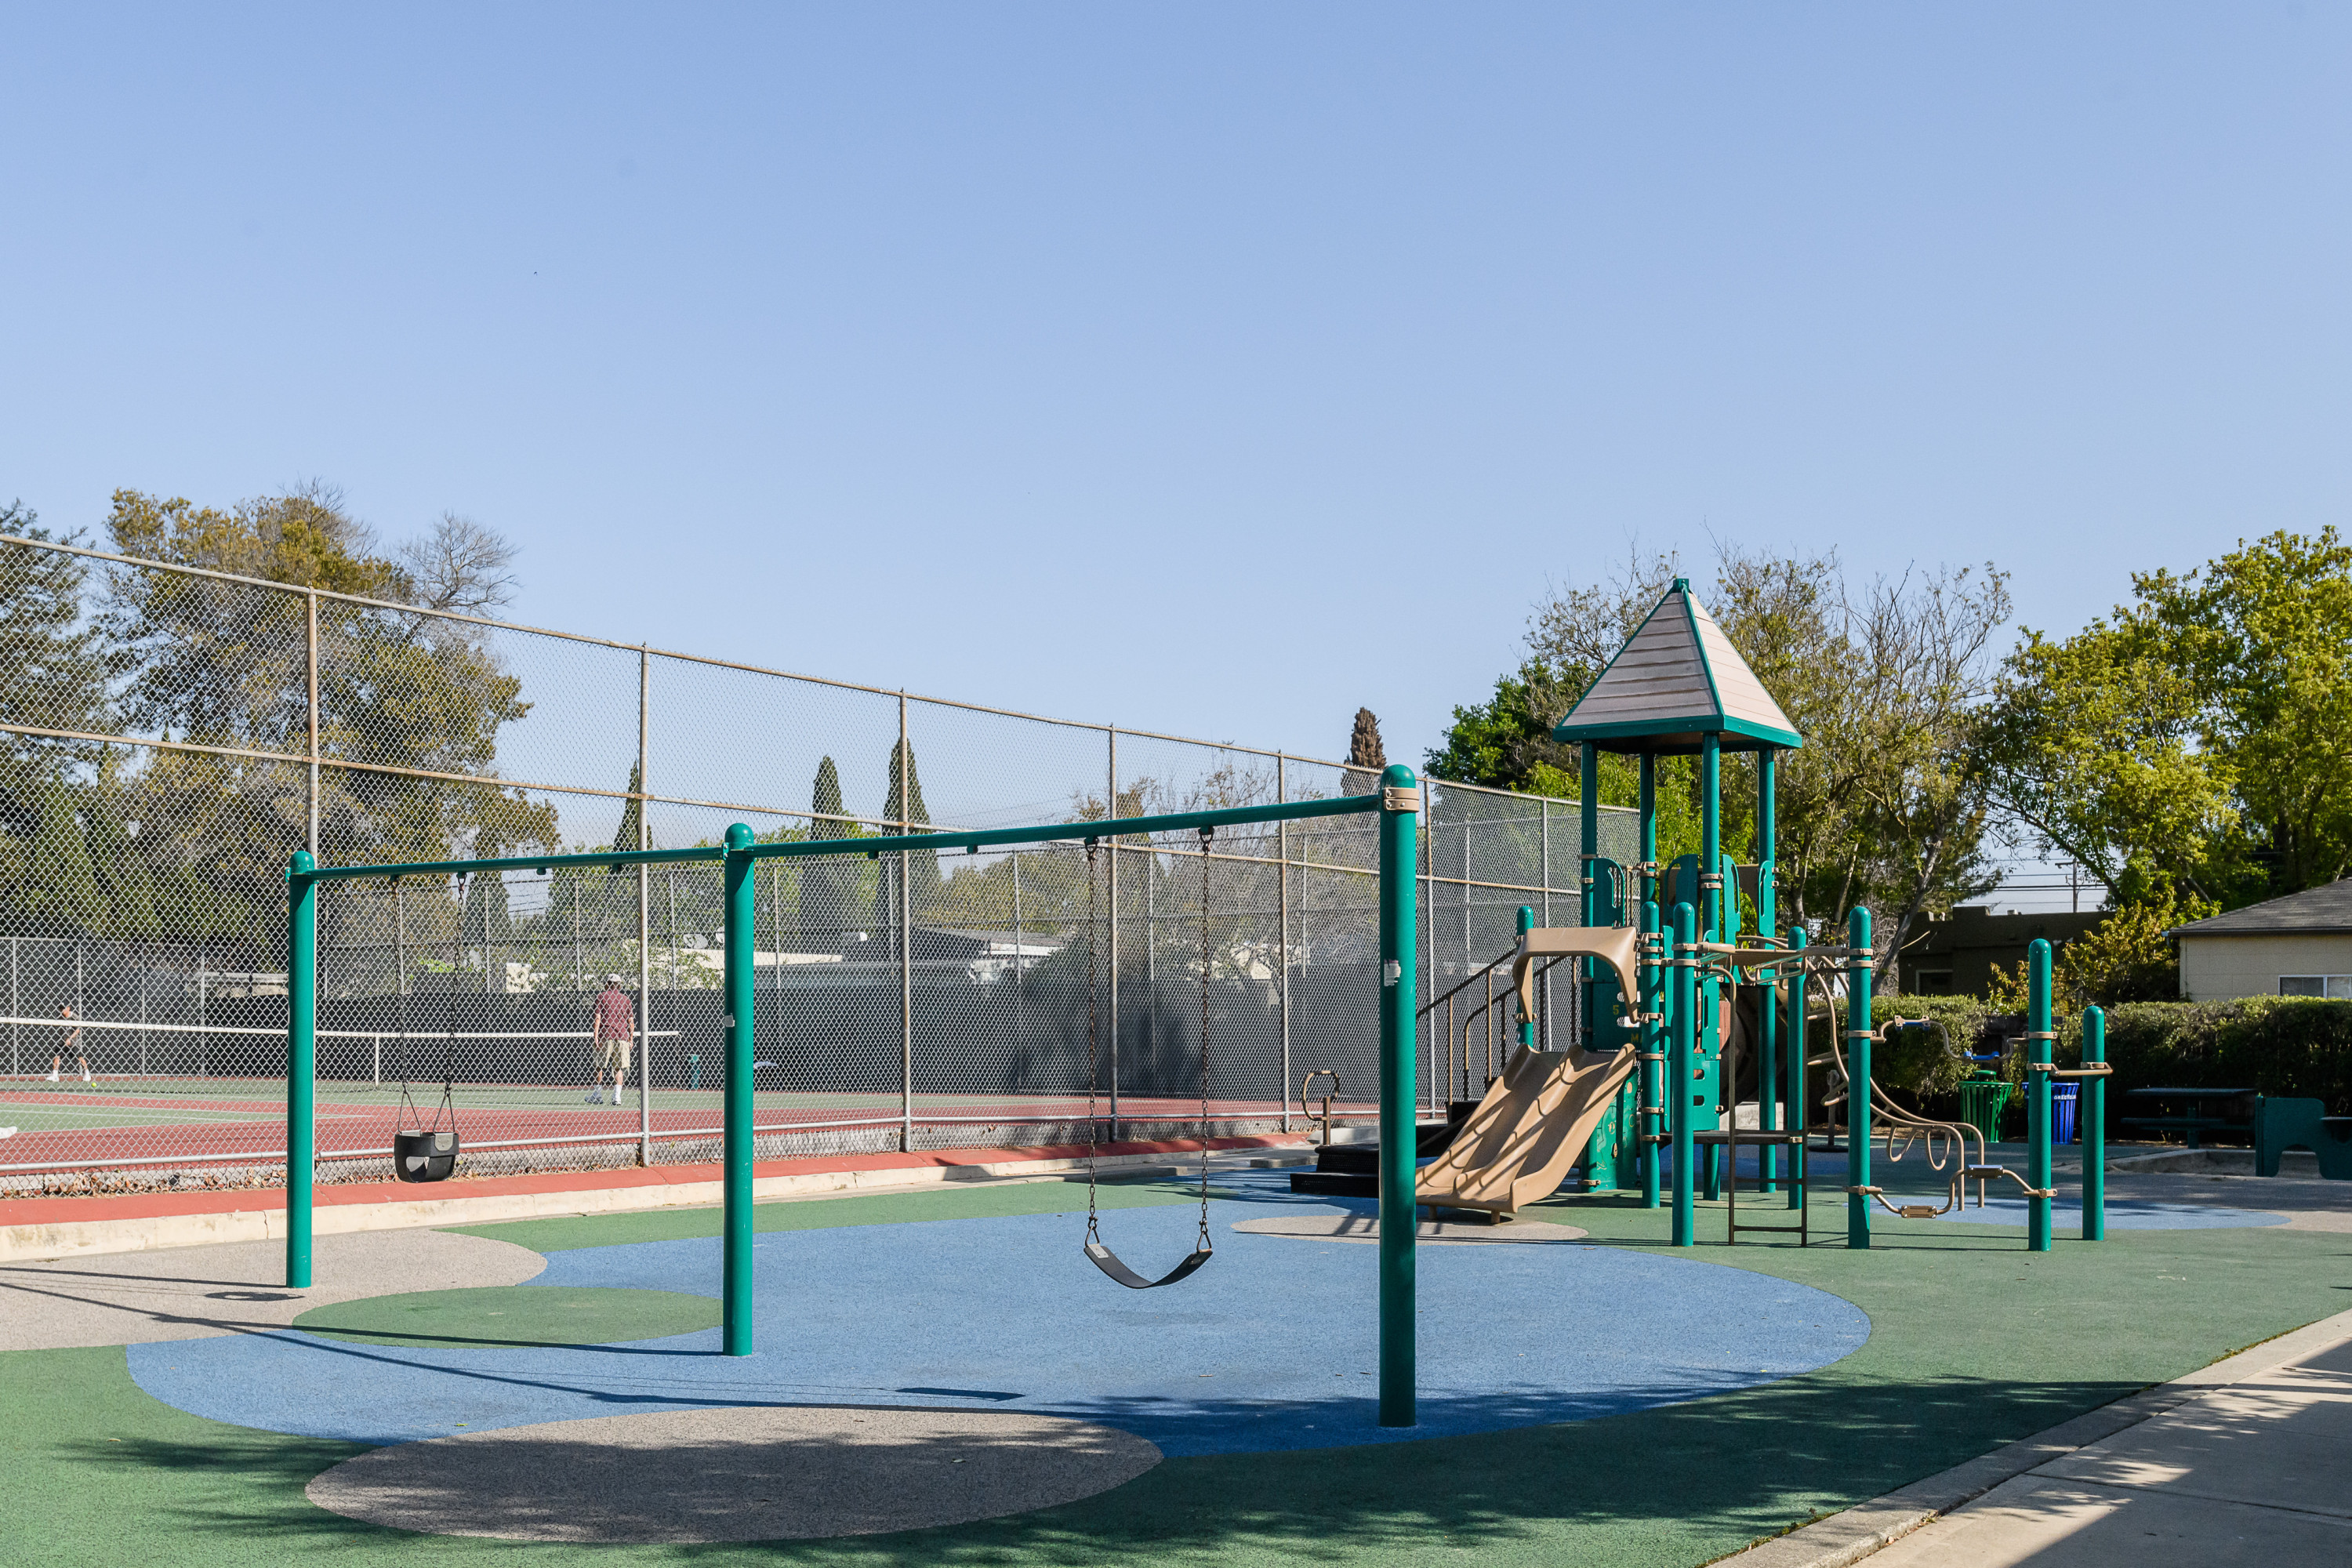 Burlingame Grove tennis court and a slide and green colored poles for support in Burlingame.